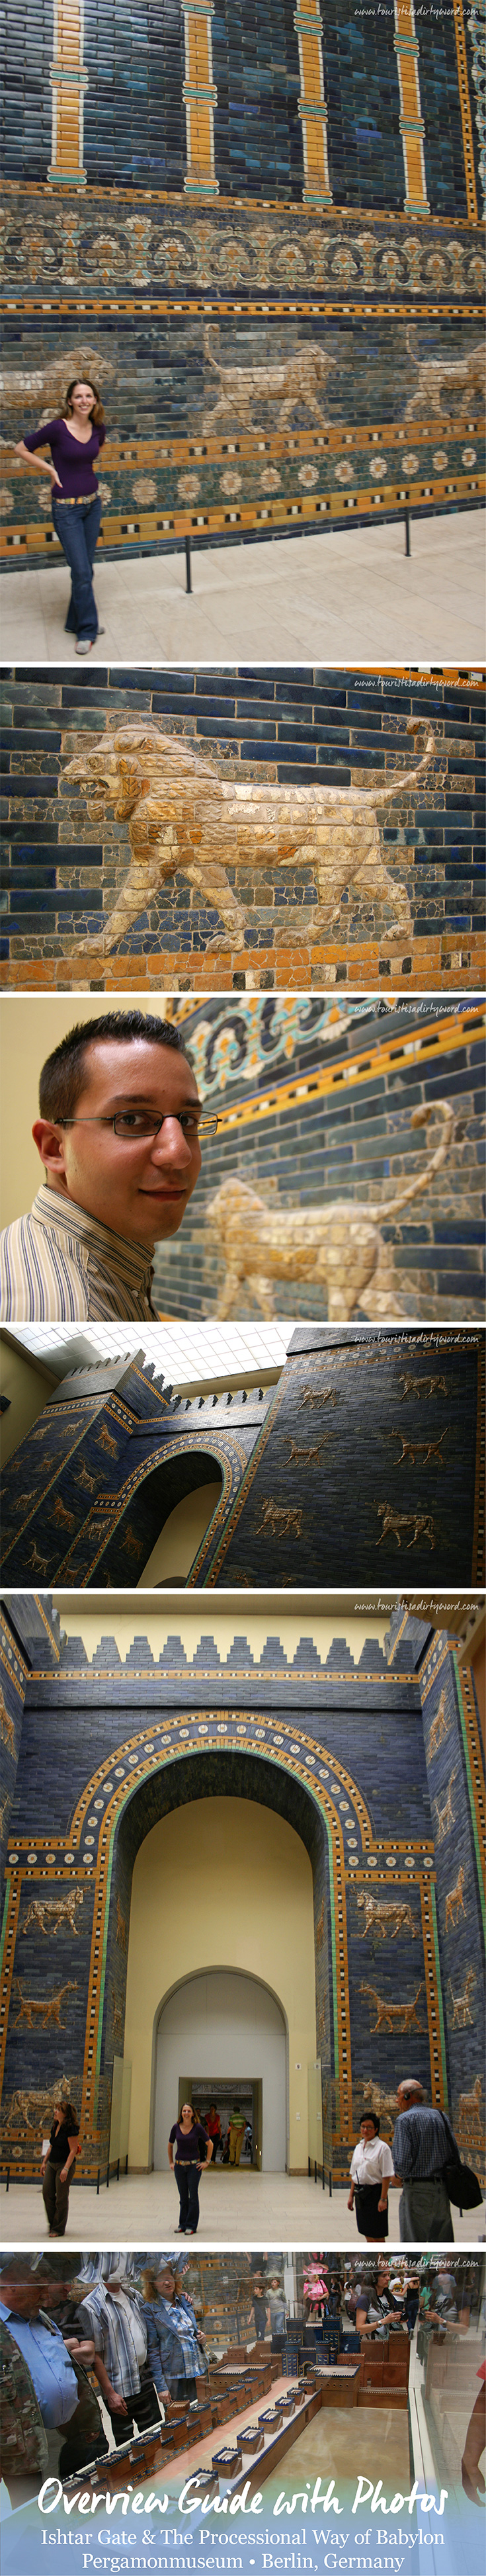 Overview Guide with Photos of the Ishtar Gate in Berlin, Germany • Tourist is a Dirty Word Blog